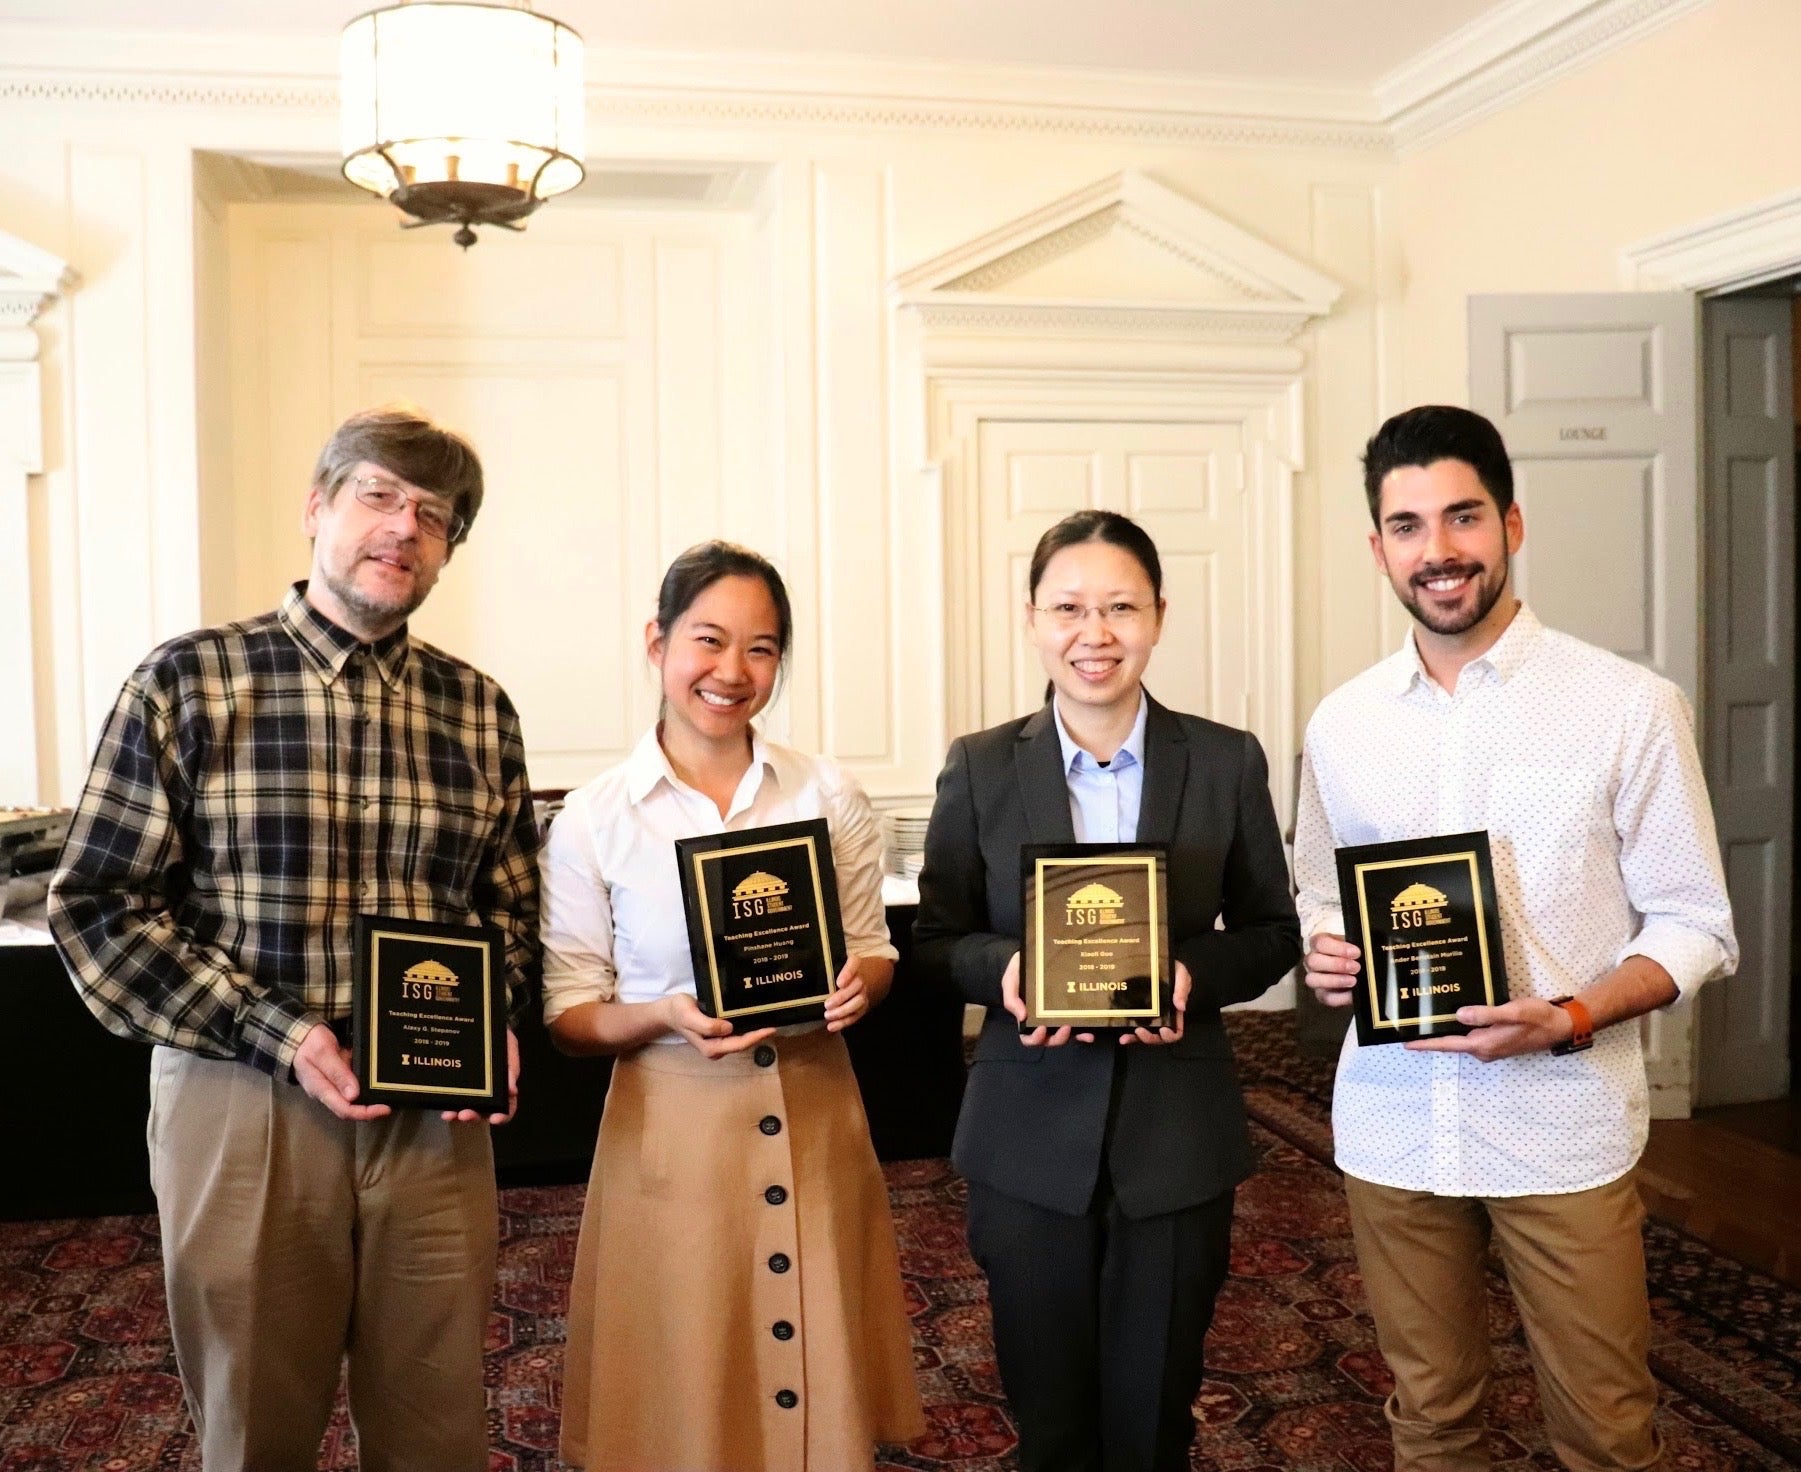 From left to right: Dr. Alexey Stepanov (Dept. of Statistics), Dr. Pinshane Huang (Dept. of Materials Science and Engineering), Dr. Xiaoli Guo (Dept. of Political Science) and Ander Beristain (Dept. of Spanish and Portuguese).